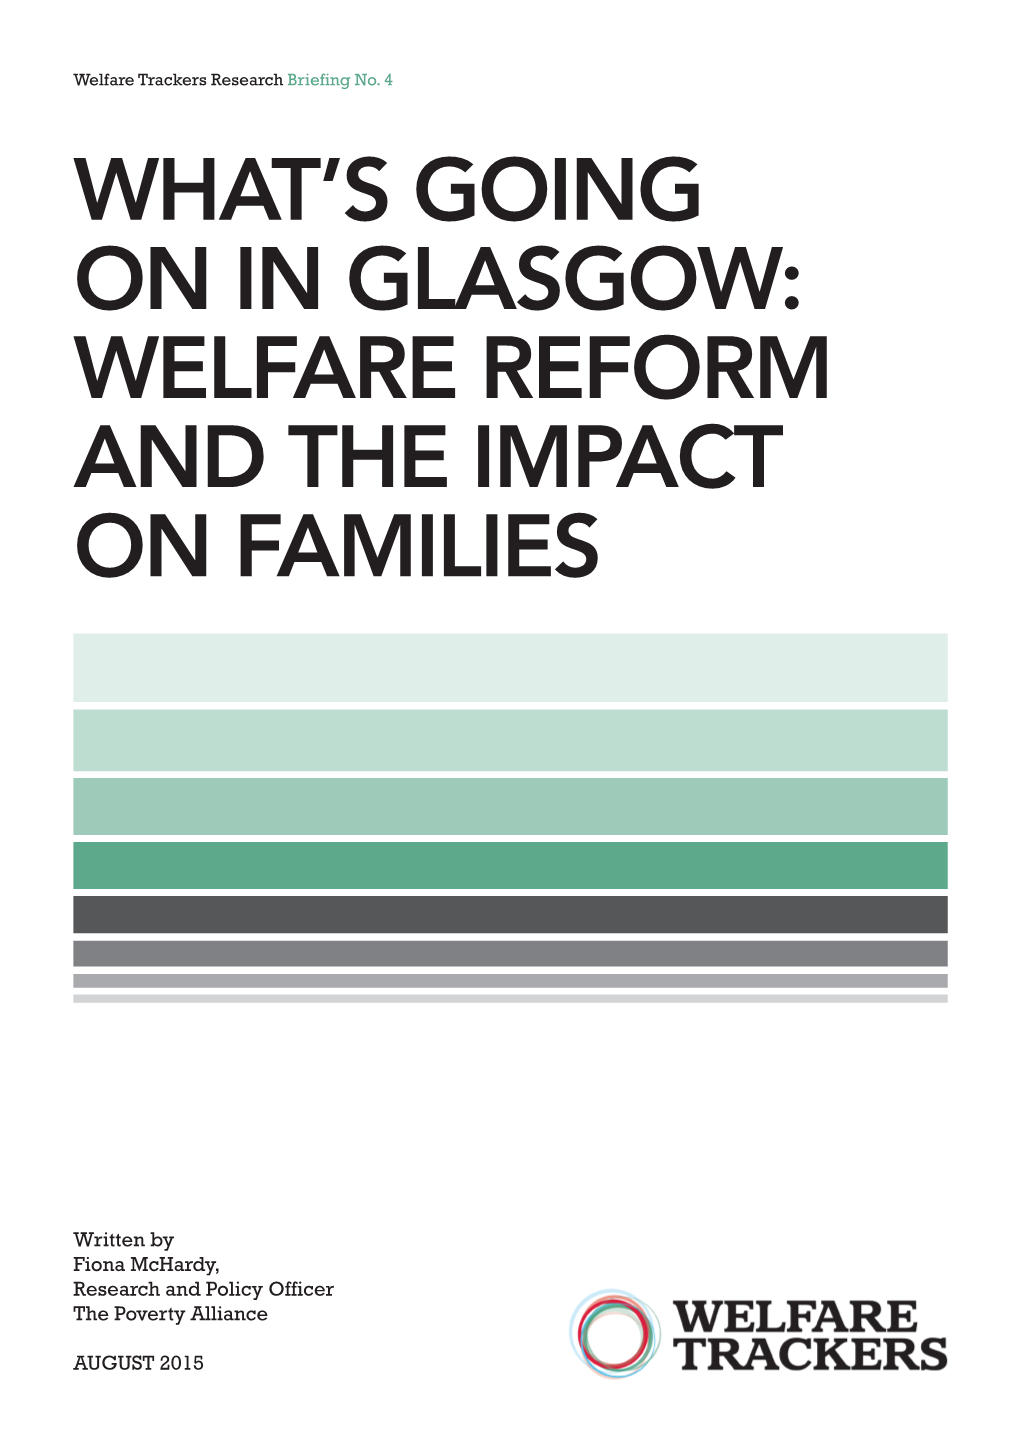 Welfare Reform and the Impact on Families